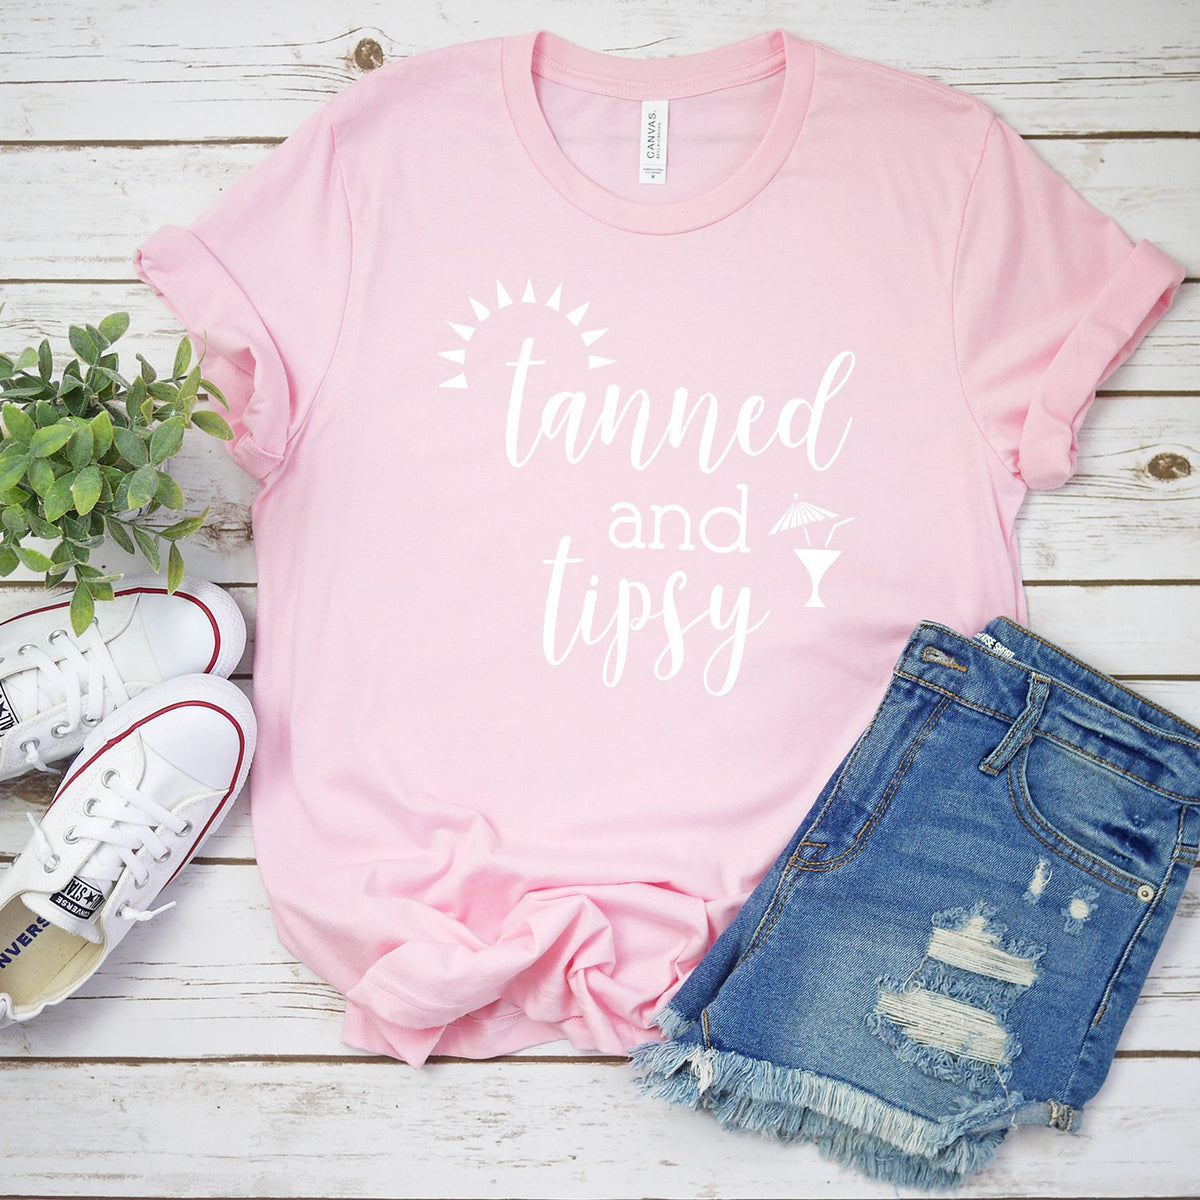 Tanned and Tipsy - Short Sleeve Tee Shirt